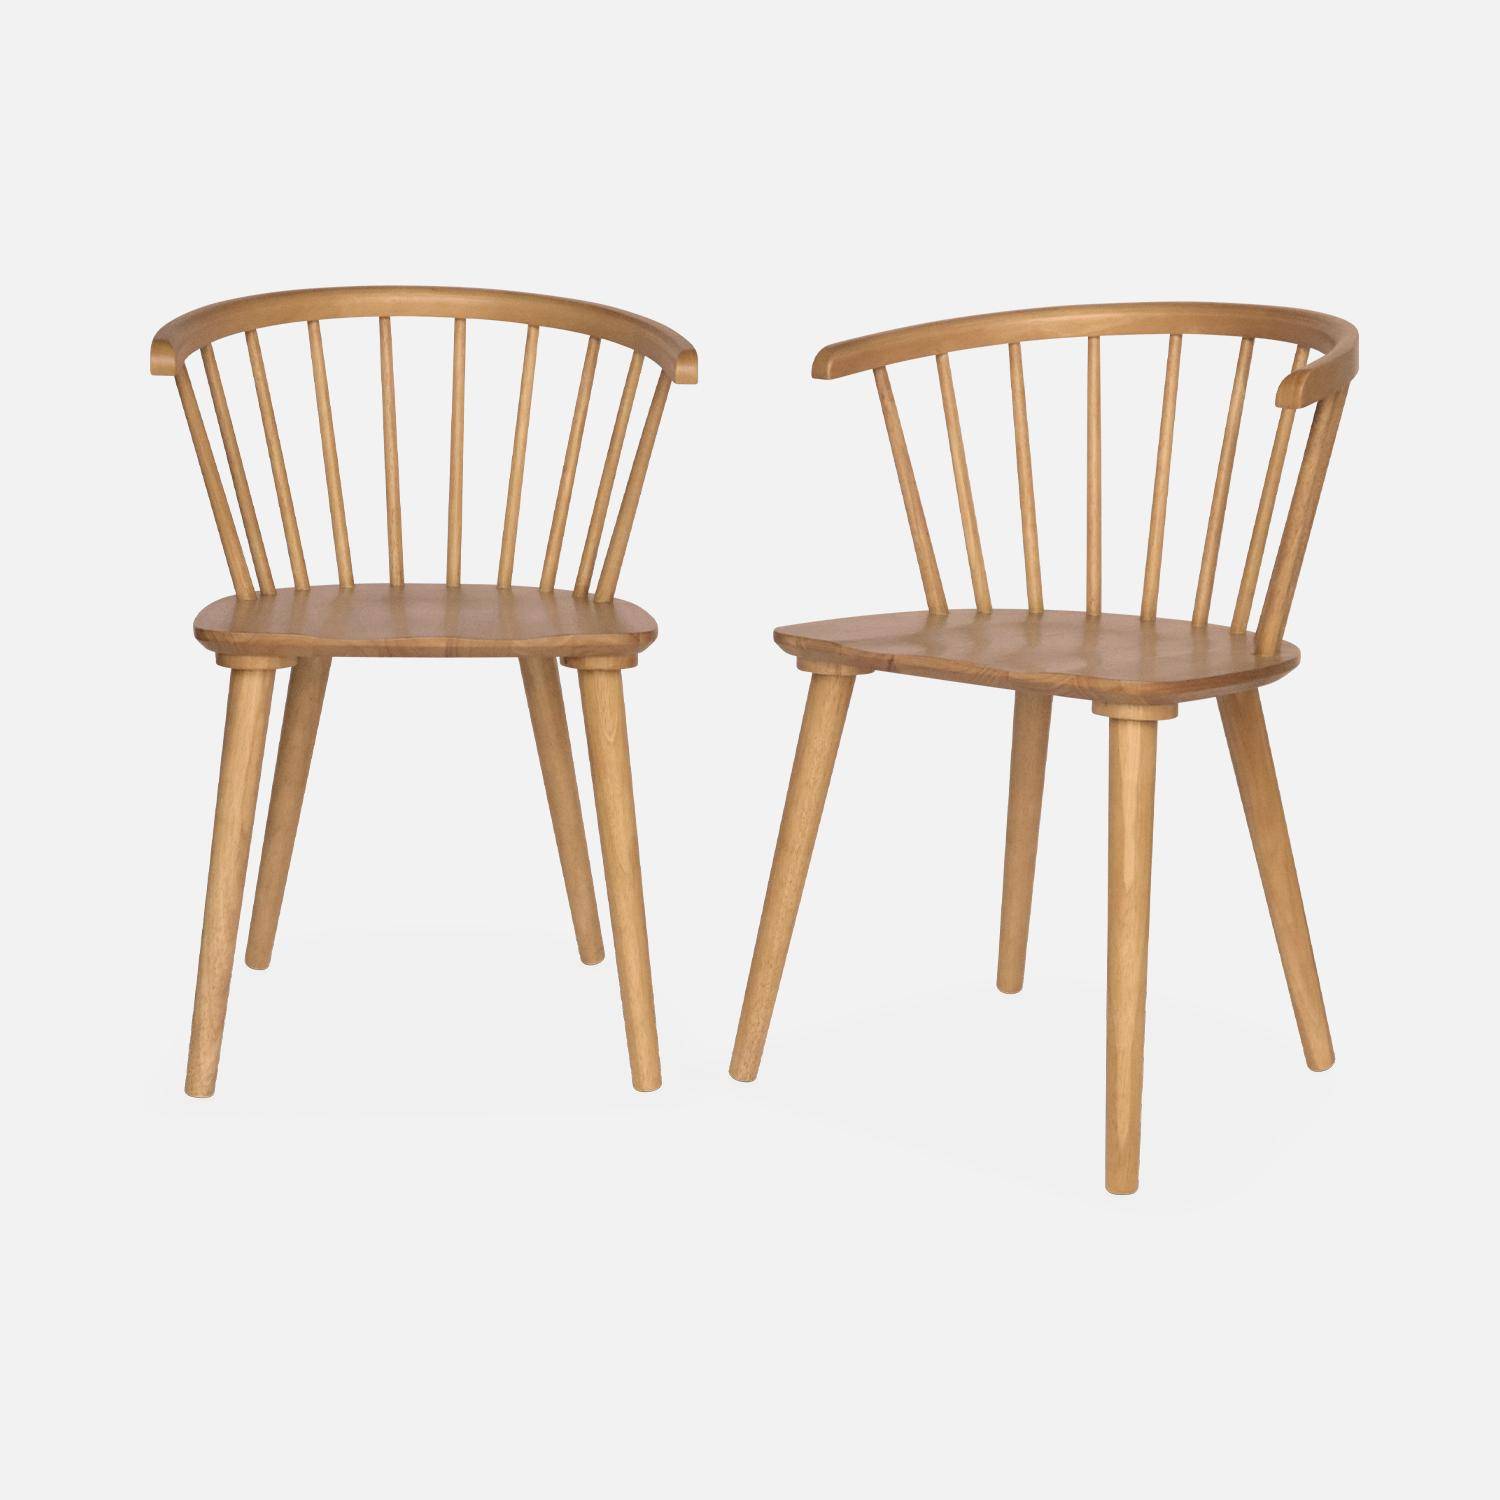 Pair of  Wood and Plywood Spindle Chairs, natural, L53 x W47.5 x H76cm  Photo3